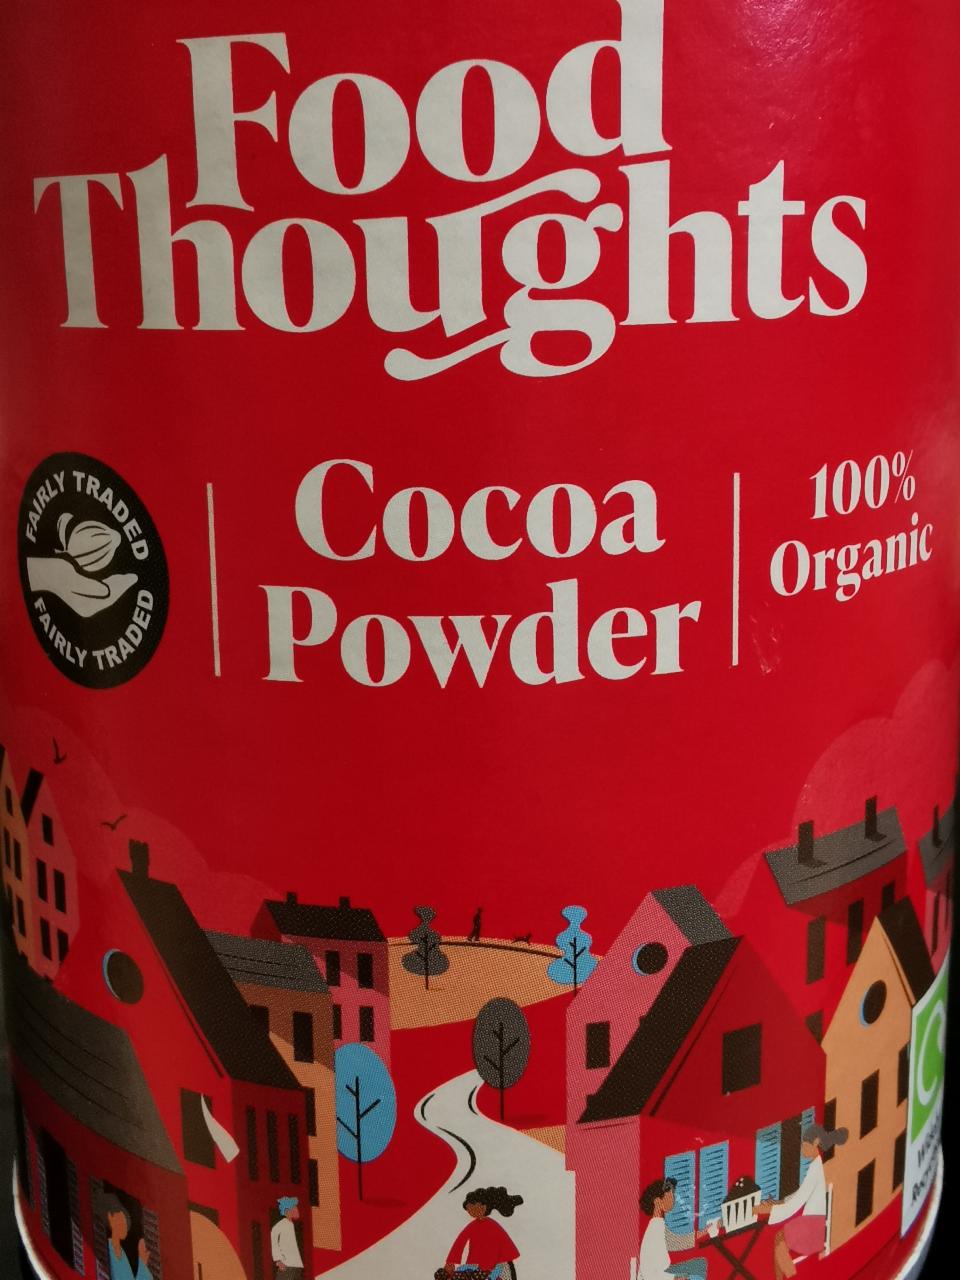 Fotografie - Cocoa Powder 100% Organic Food Thoughts